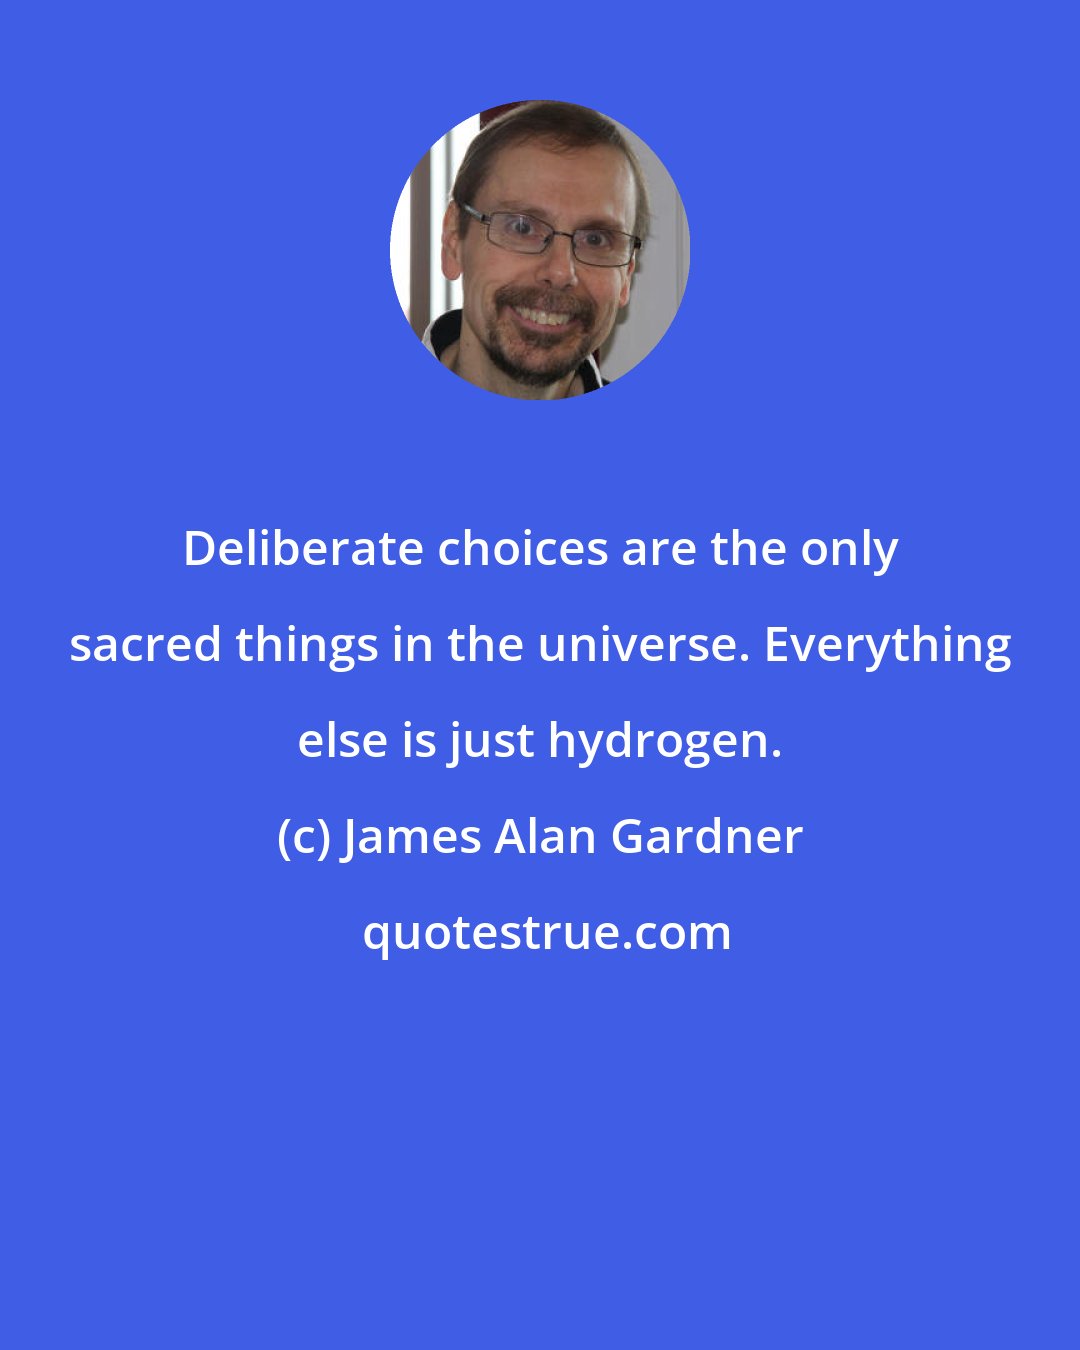 James Alan Gardner: Deliberate choices are the only sacred things in the universe. Everything else is just hydrogen.